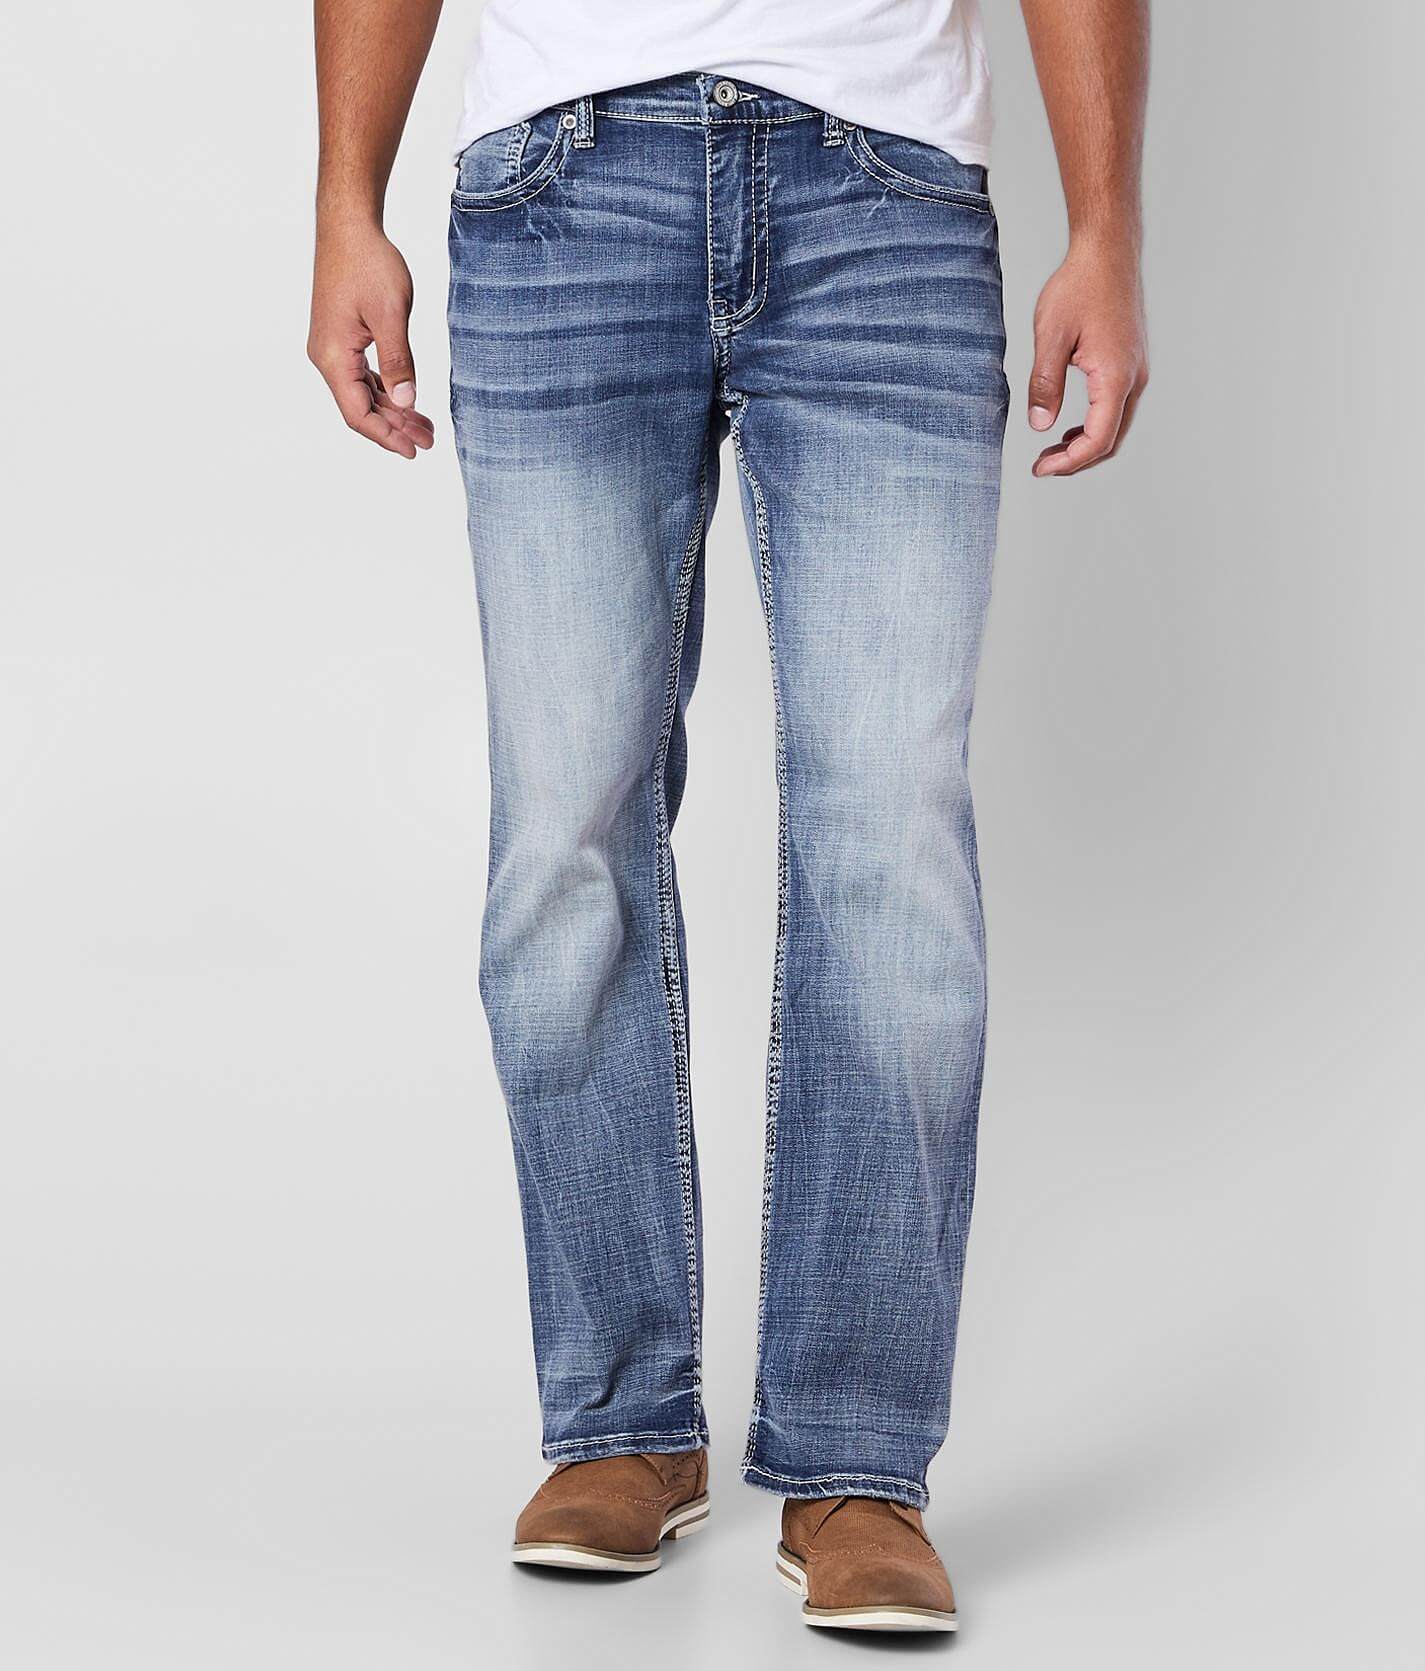 levis 511 and 512